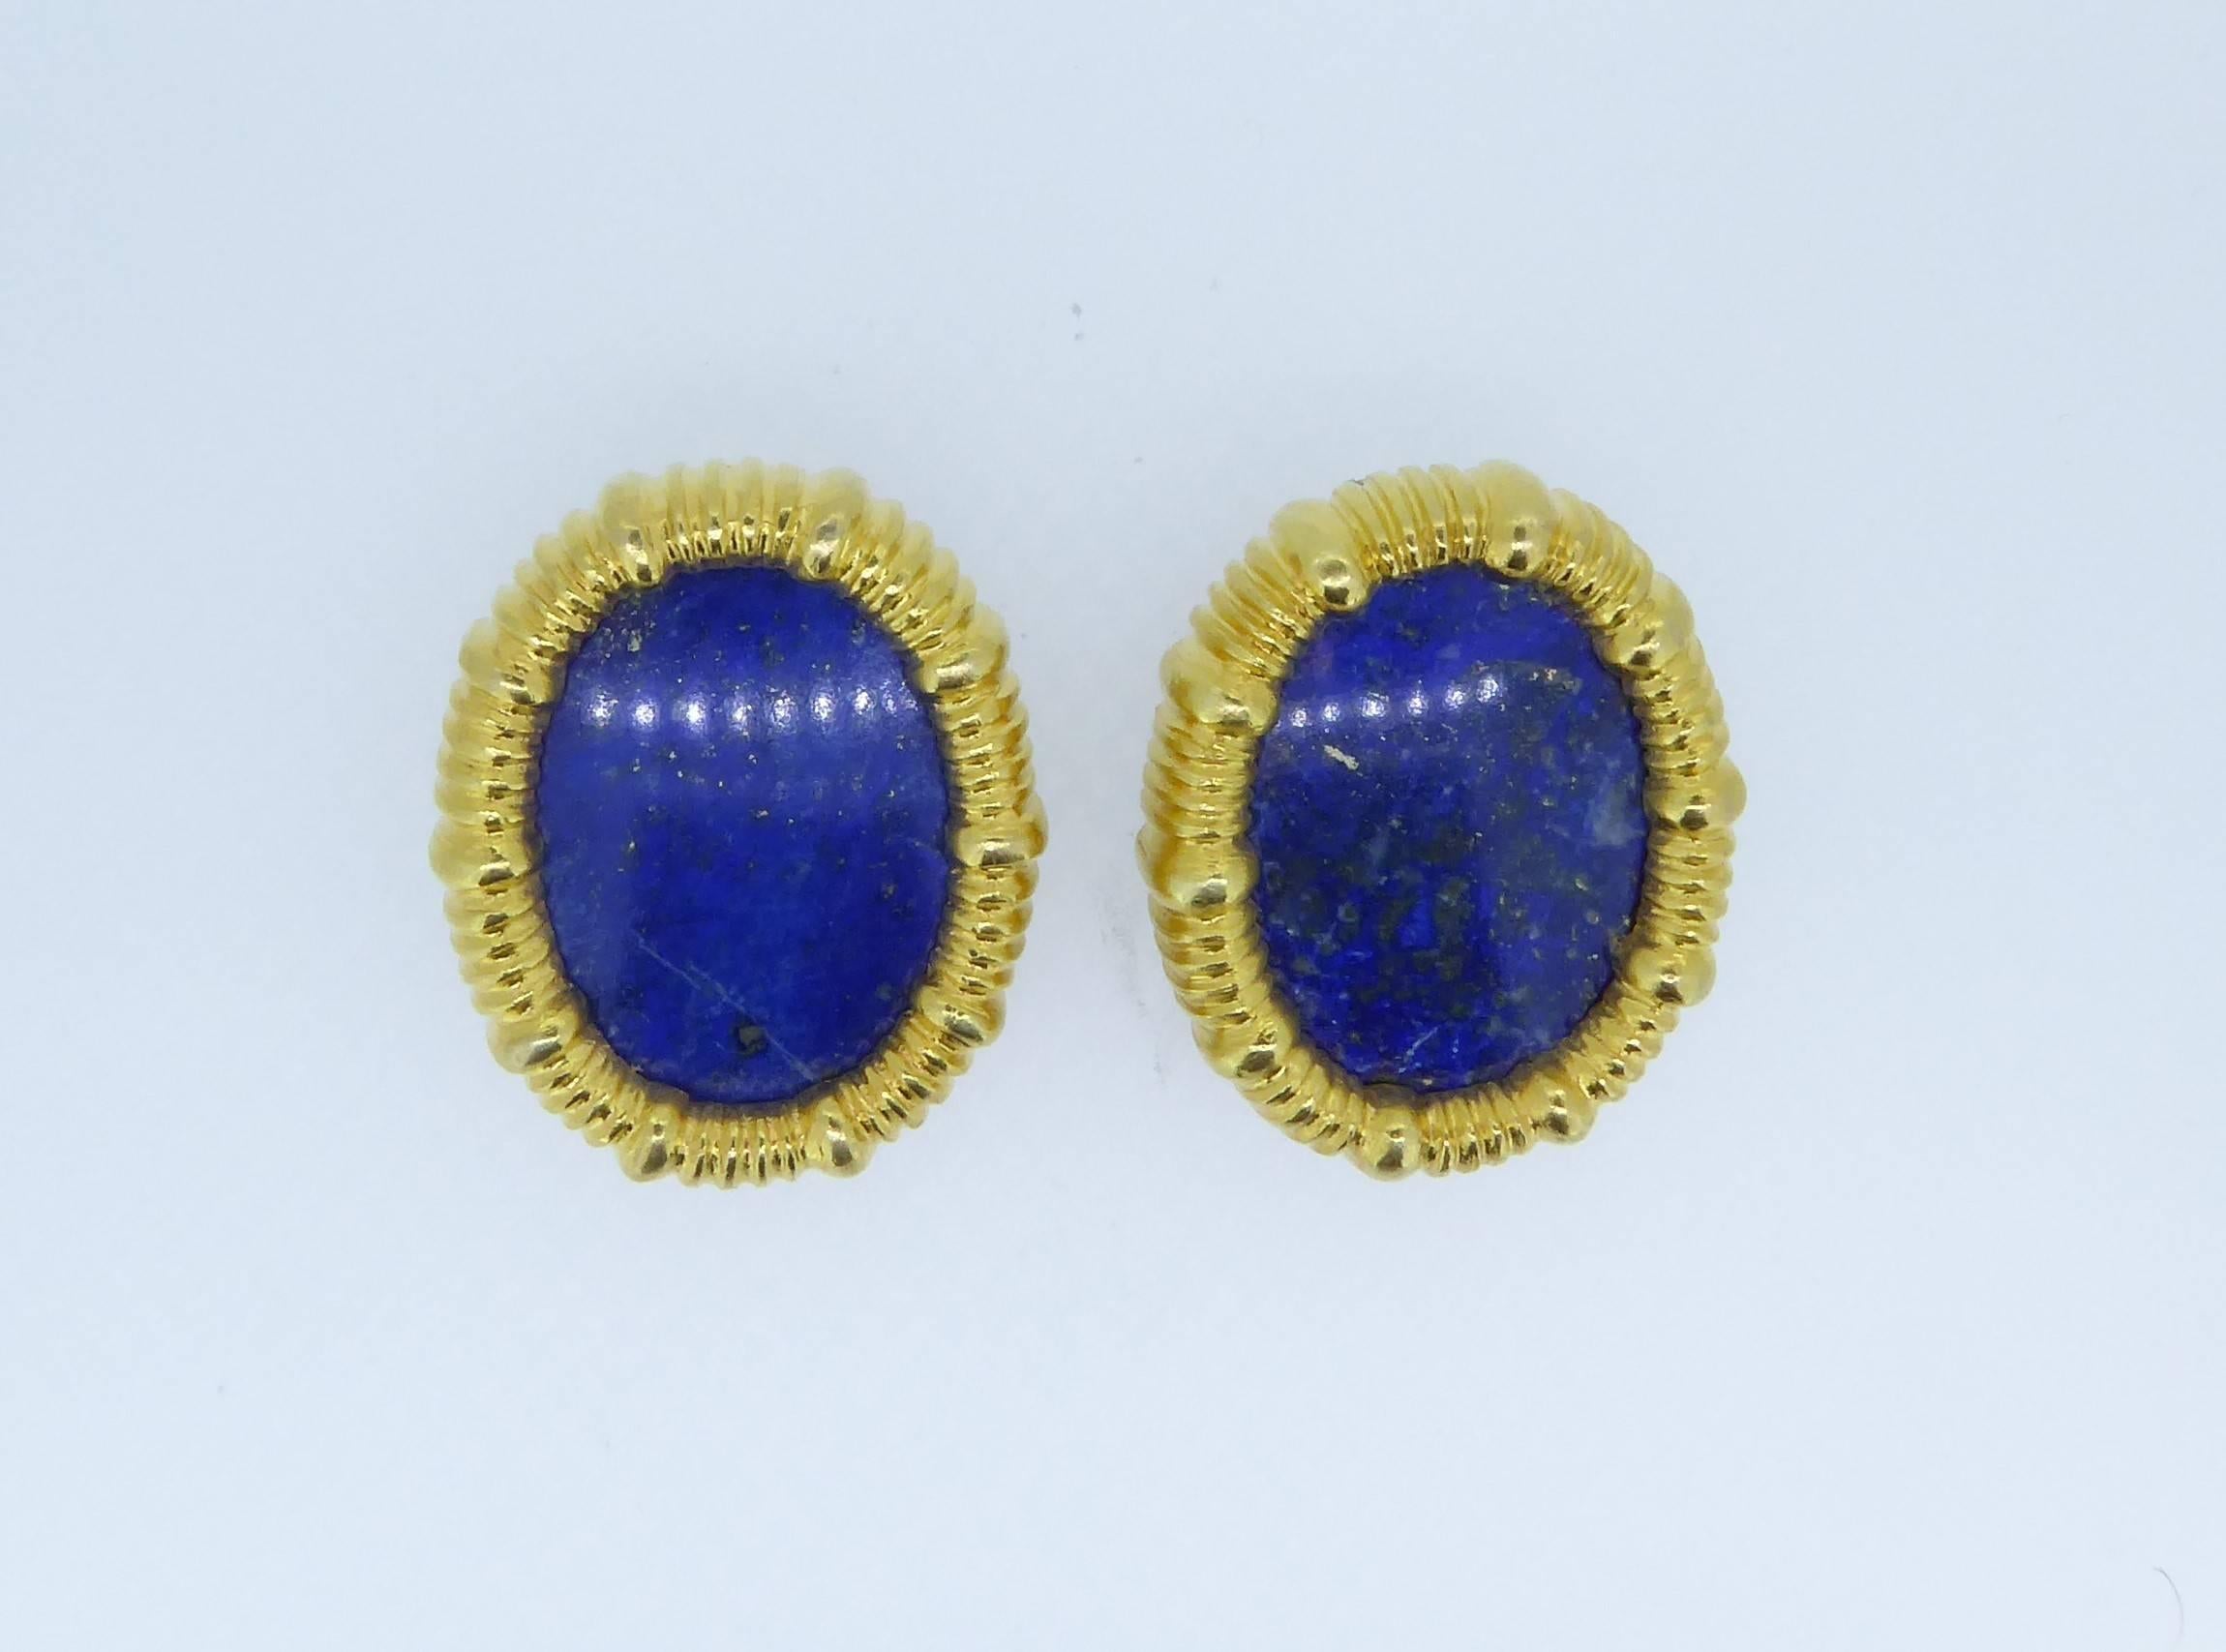 Oval Cut Lalaounis Lapis Lazuli and 18 Carat Yellow Gold Oval Ear Clips